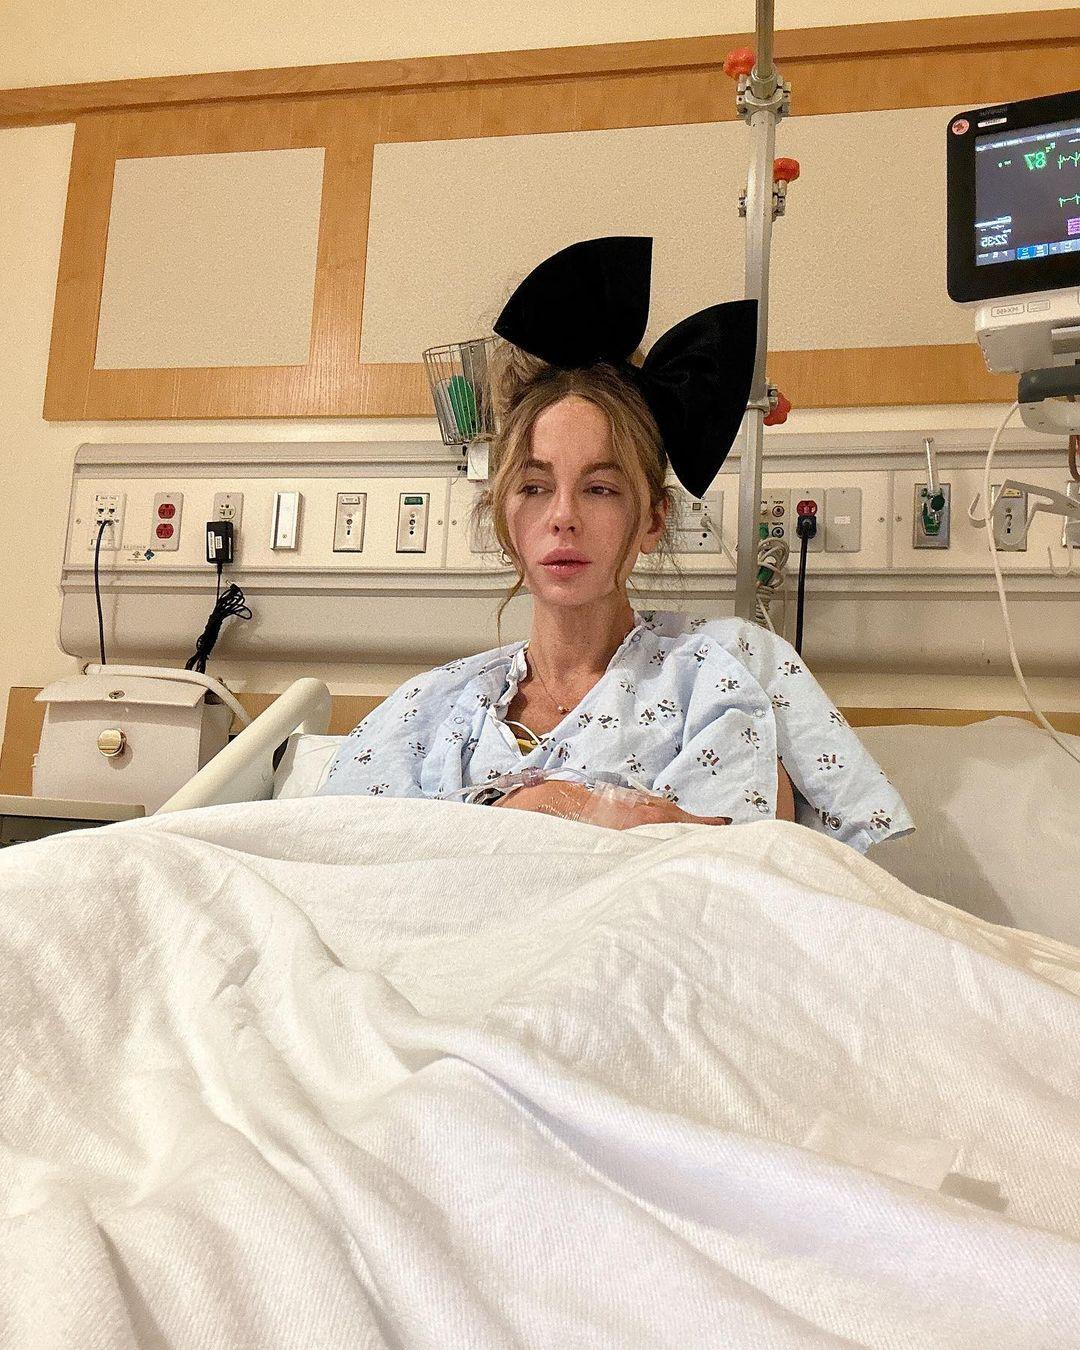 Kate Beckinsale in the hospital